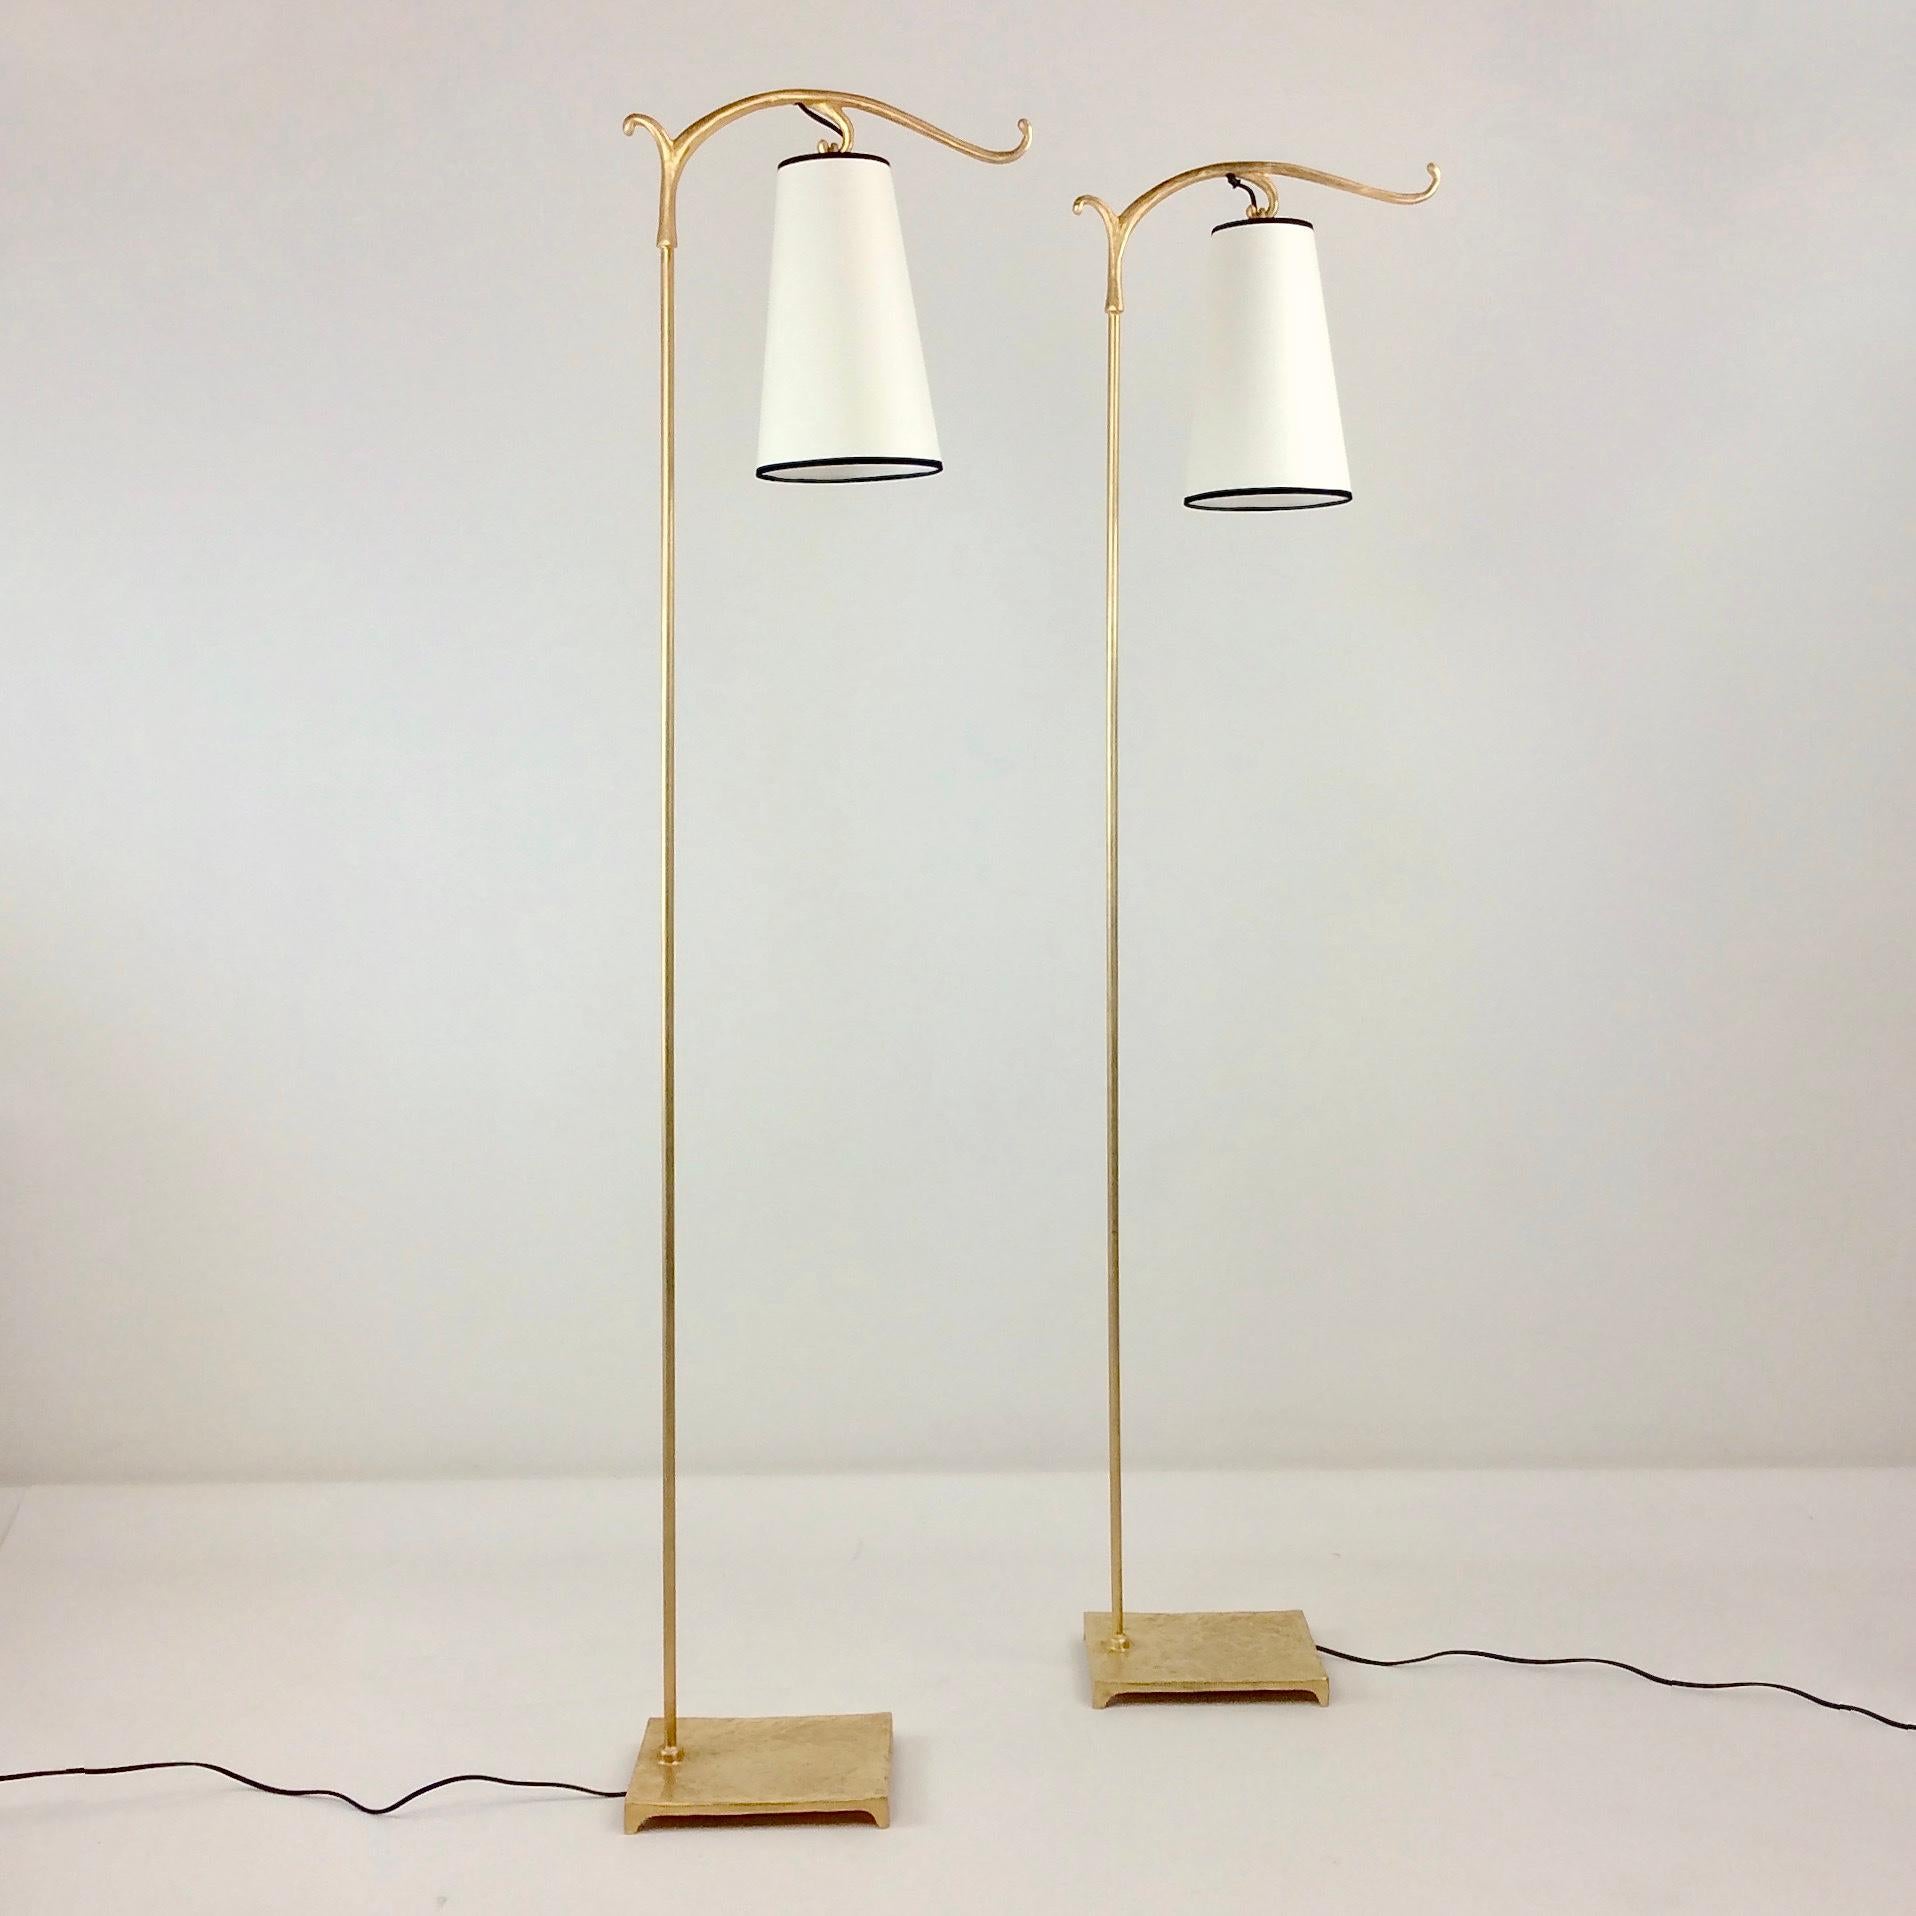 Nice pair of floor lamps, circa 1980, France.
Gilt wrought iron. New white fabric shades with black fabric border.
One E27 bulb.
Dimensions: 160 cm H, 38 cm W, 19 cm D.
All purchases are covered by our Buyer Protection Guarantee.
This item can be